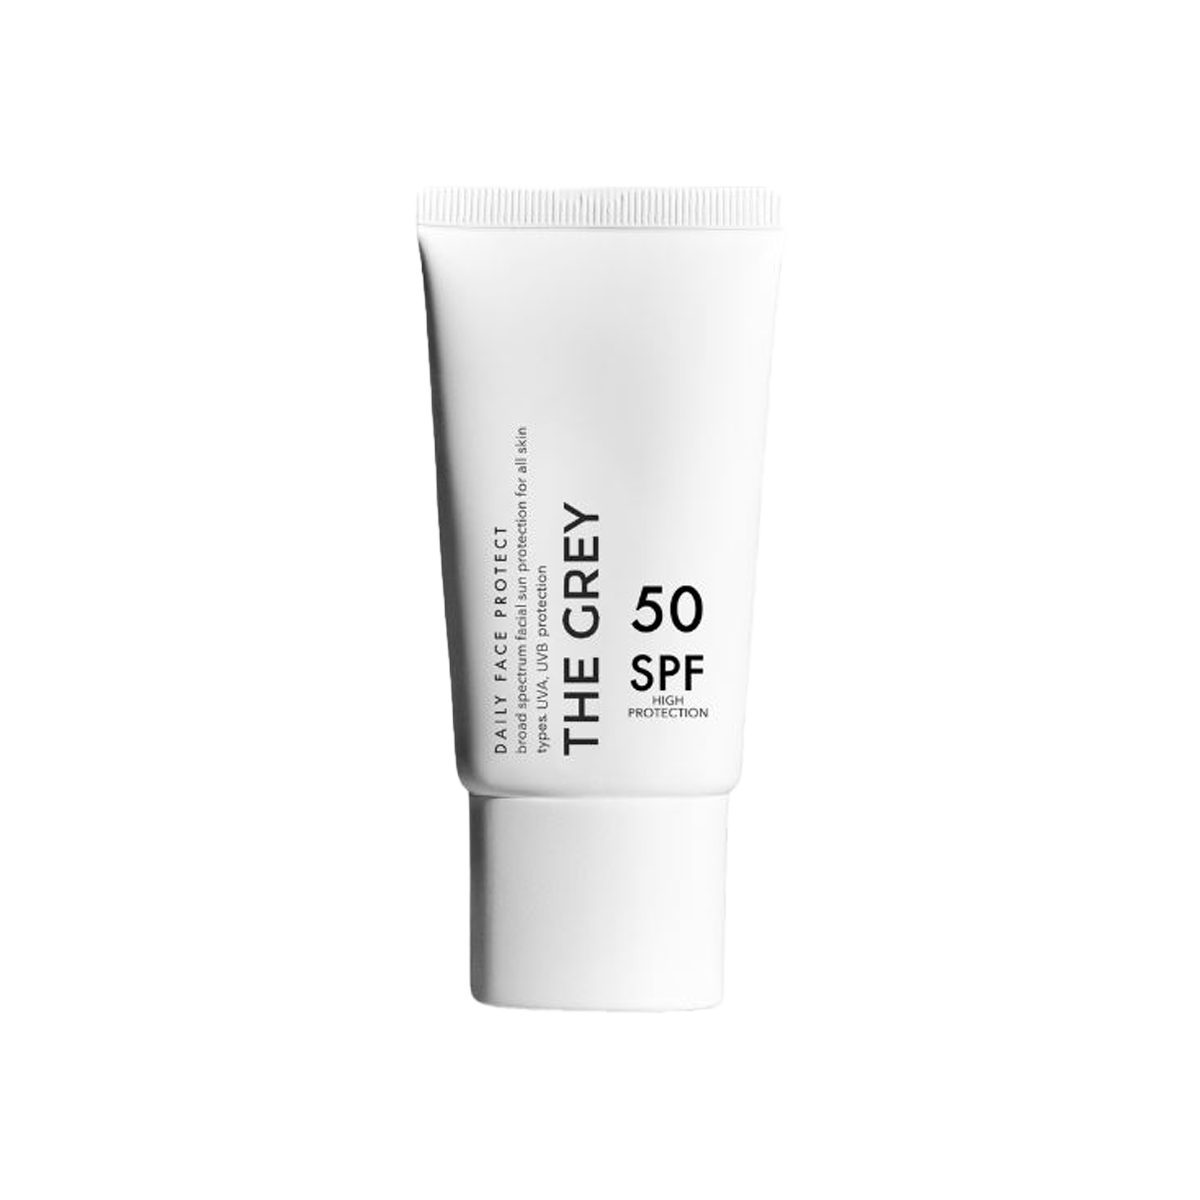 THE GREY Daily Face Protect SPF50 50ml